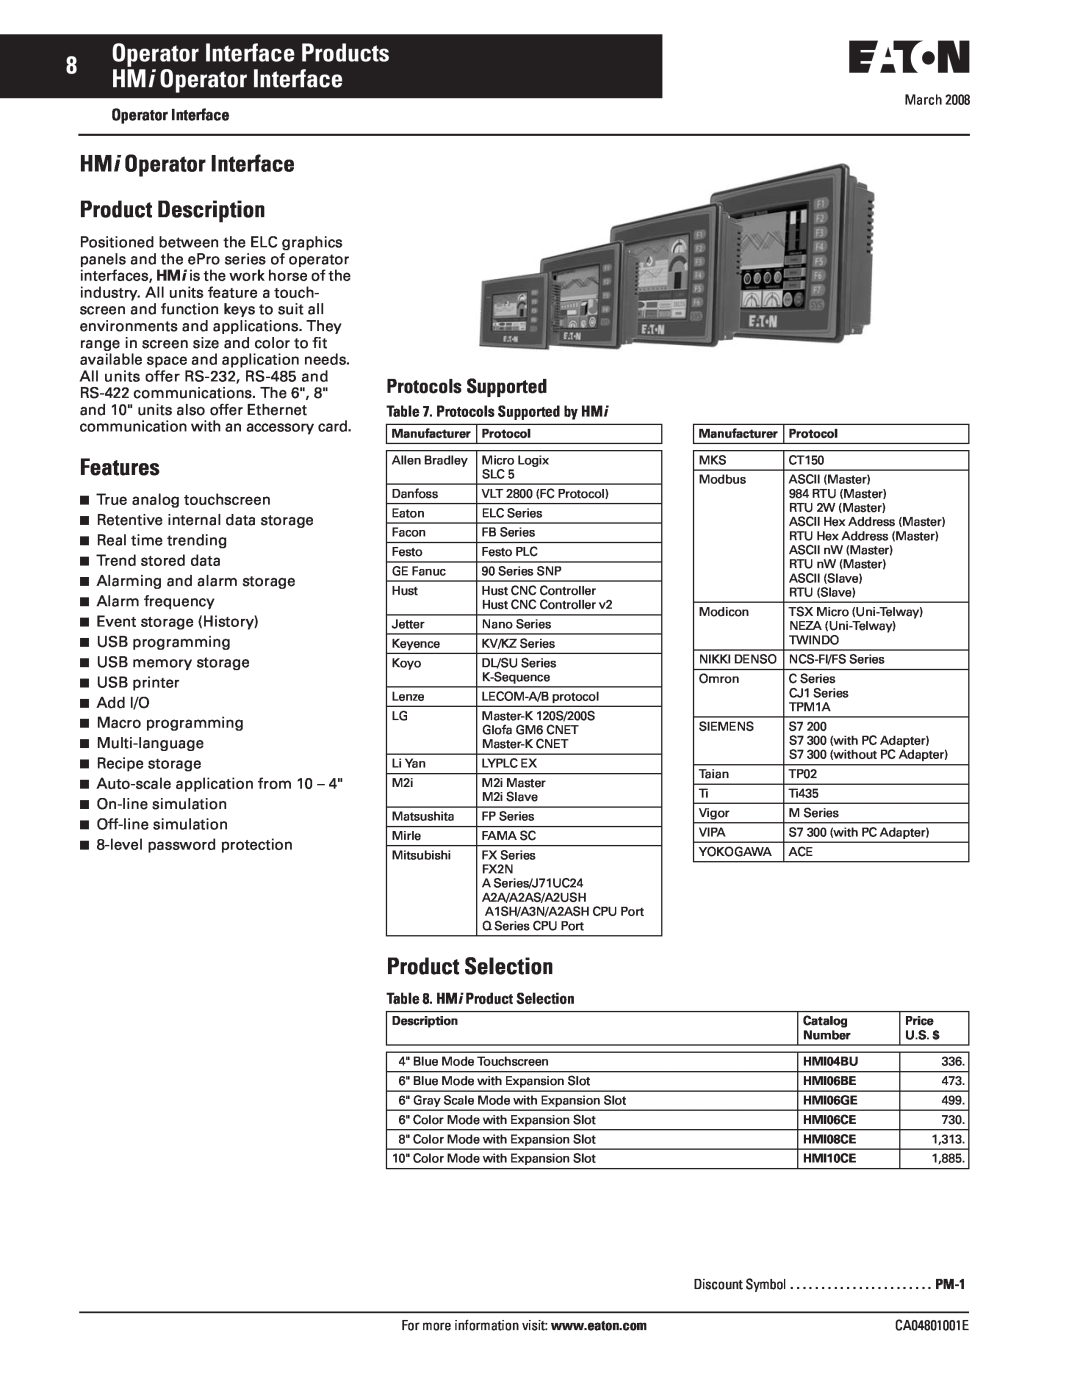 Eaton Electrical CA04801001E HMi Operator Interface Product Description, Features, Product Selection, Protocols Supported 